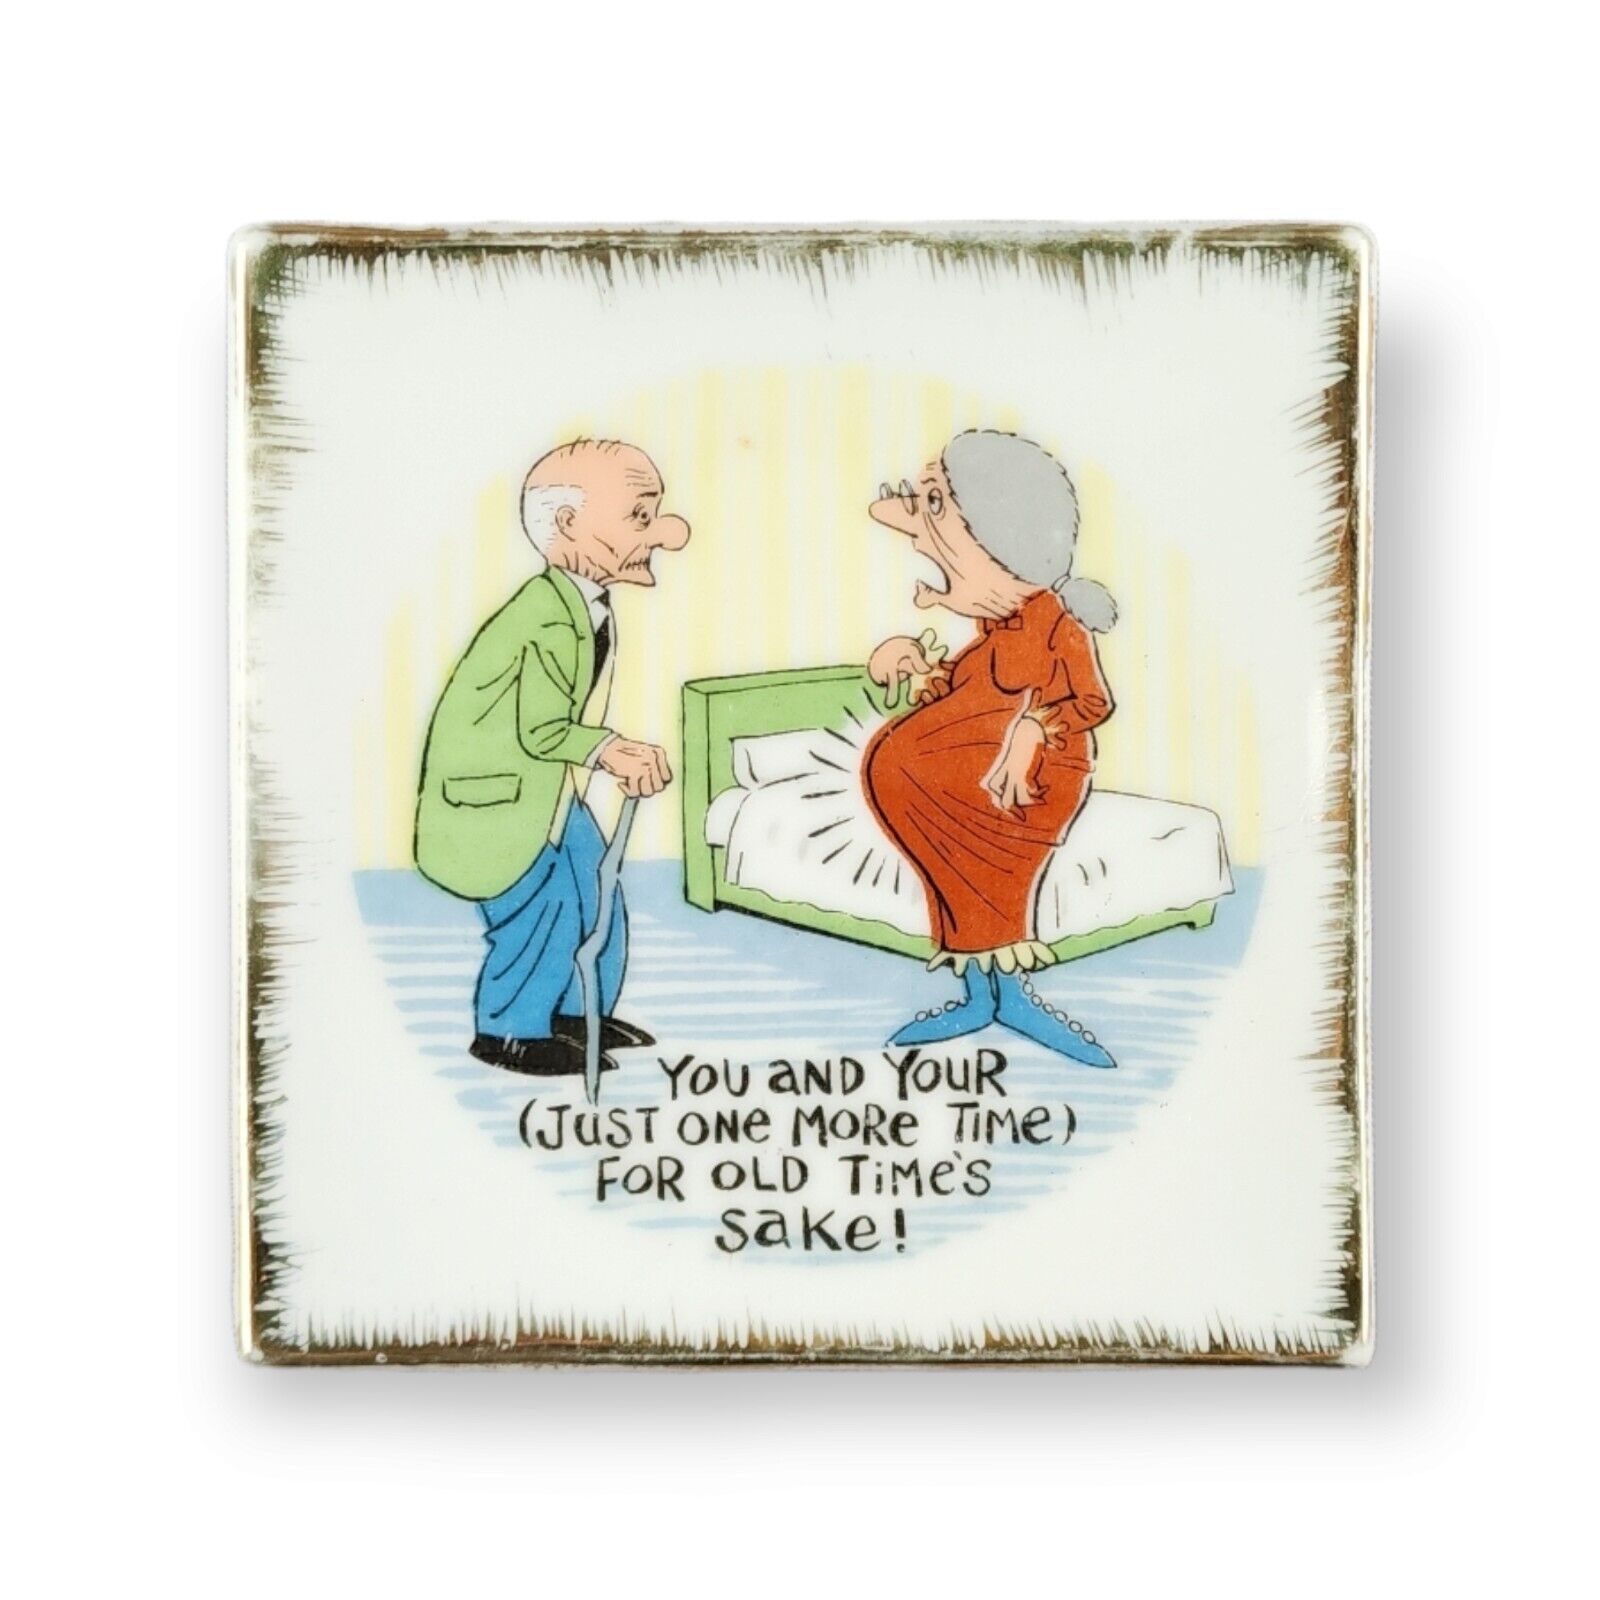 Vintage Adult Humor Old Couple Funny Pregnancy Plate / Tray 